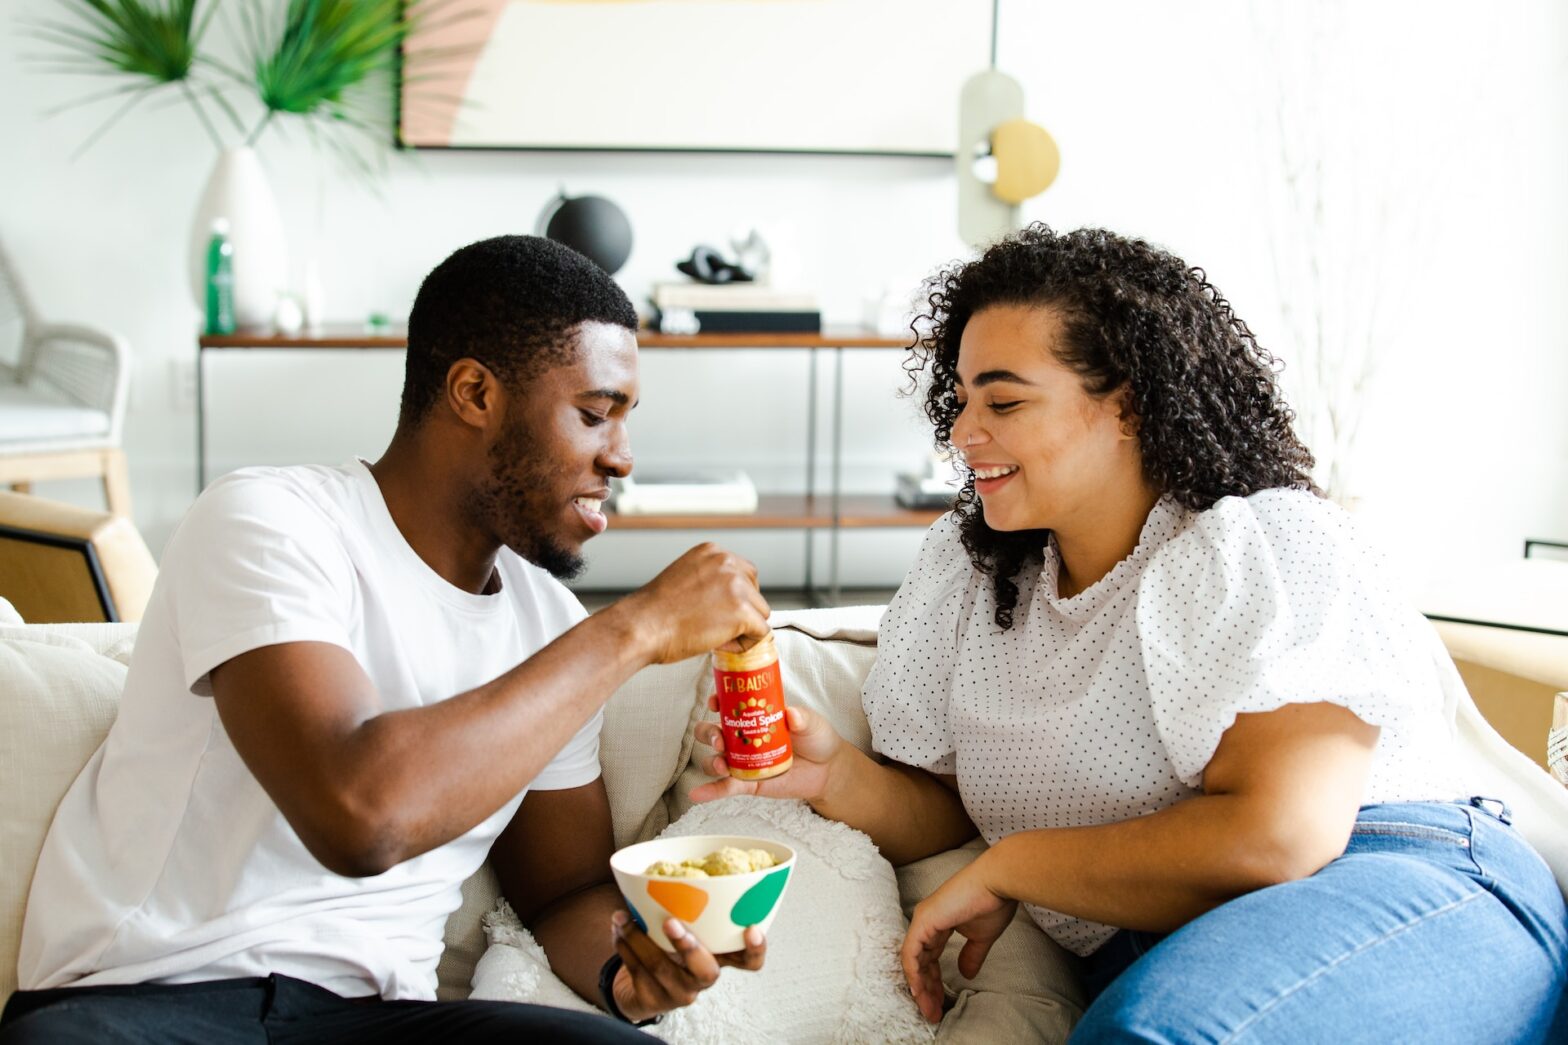 Black couple sitting on couch eating and getting to know each other.